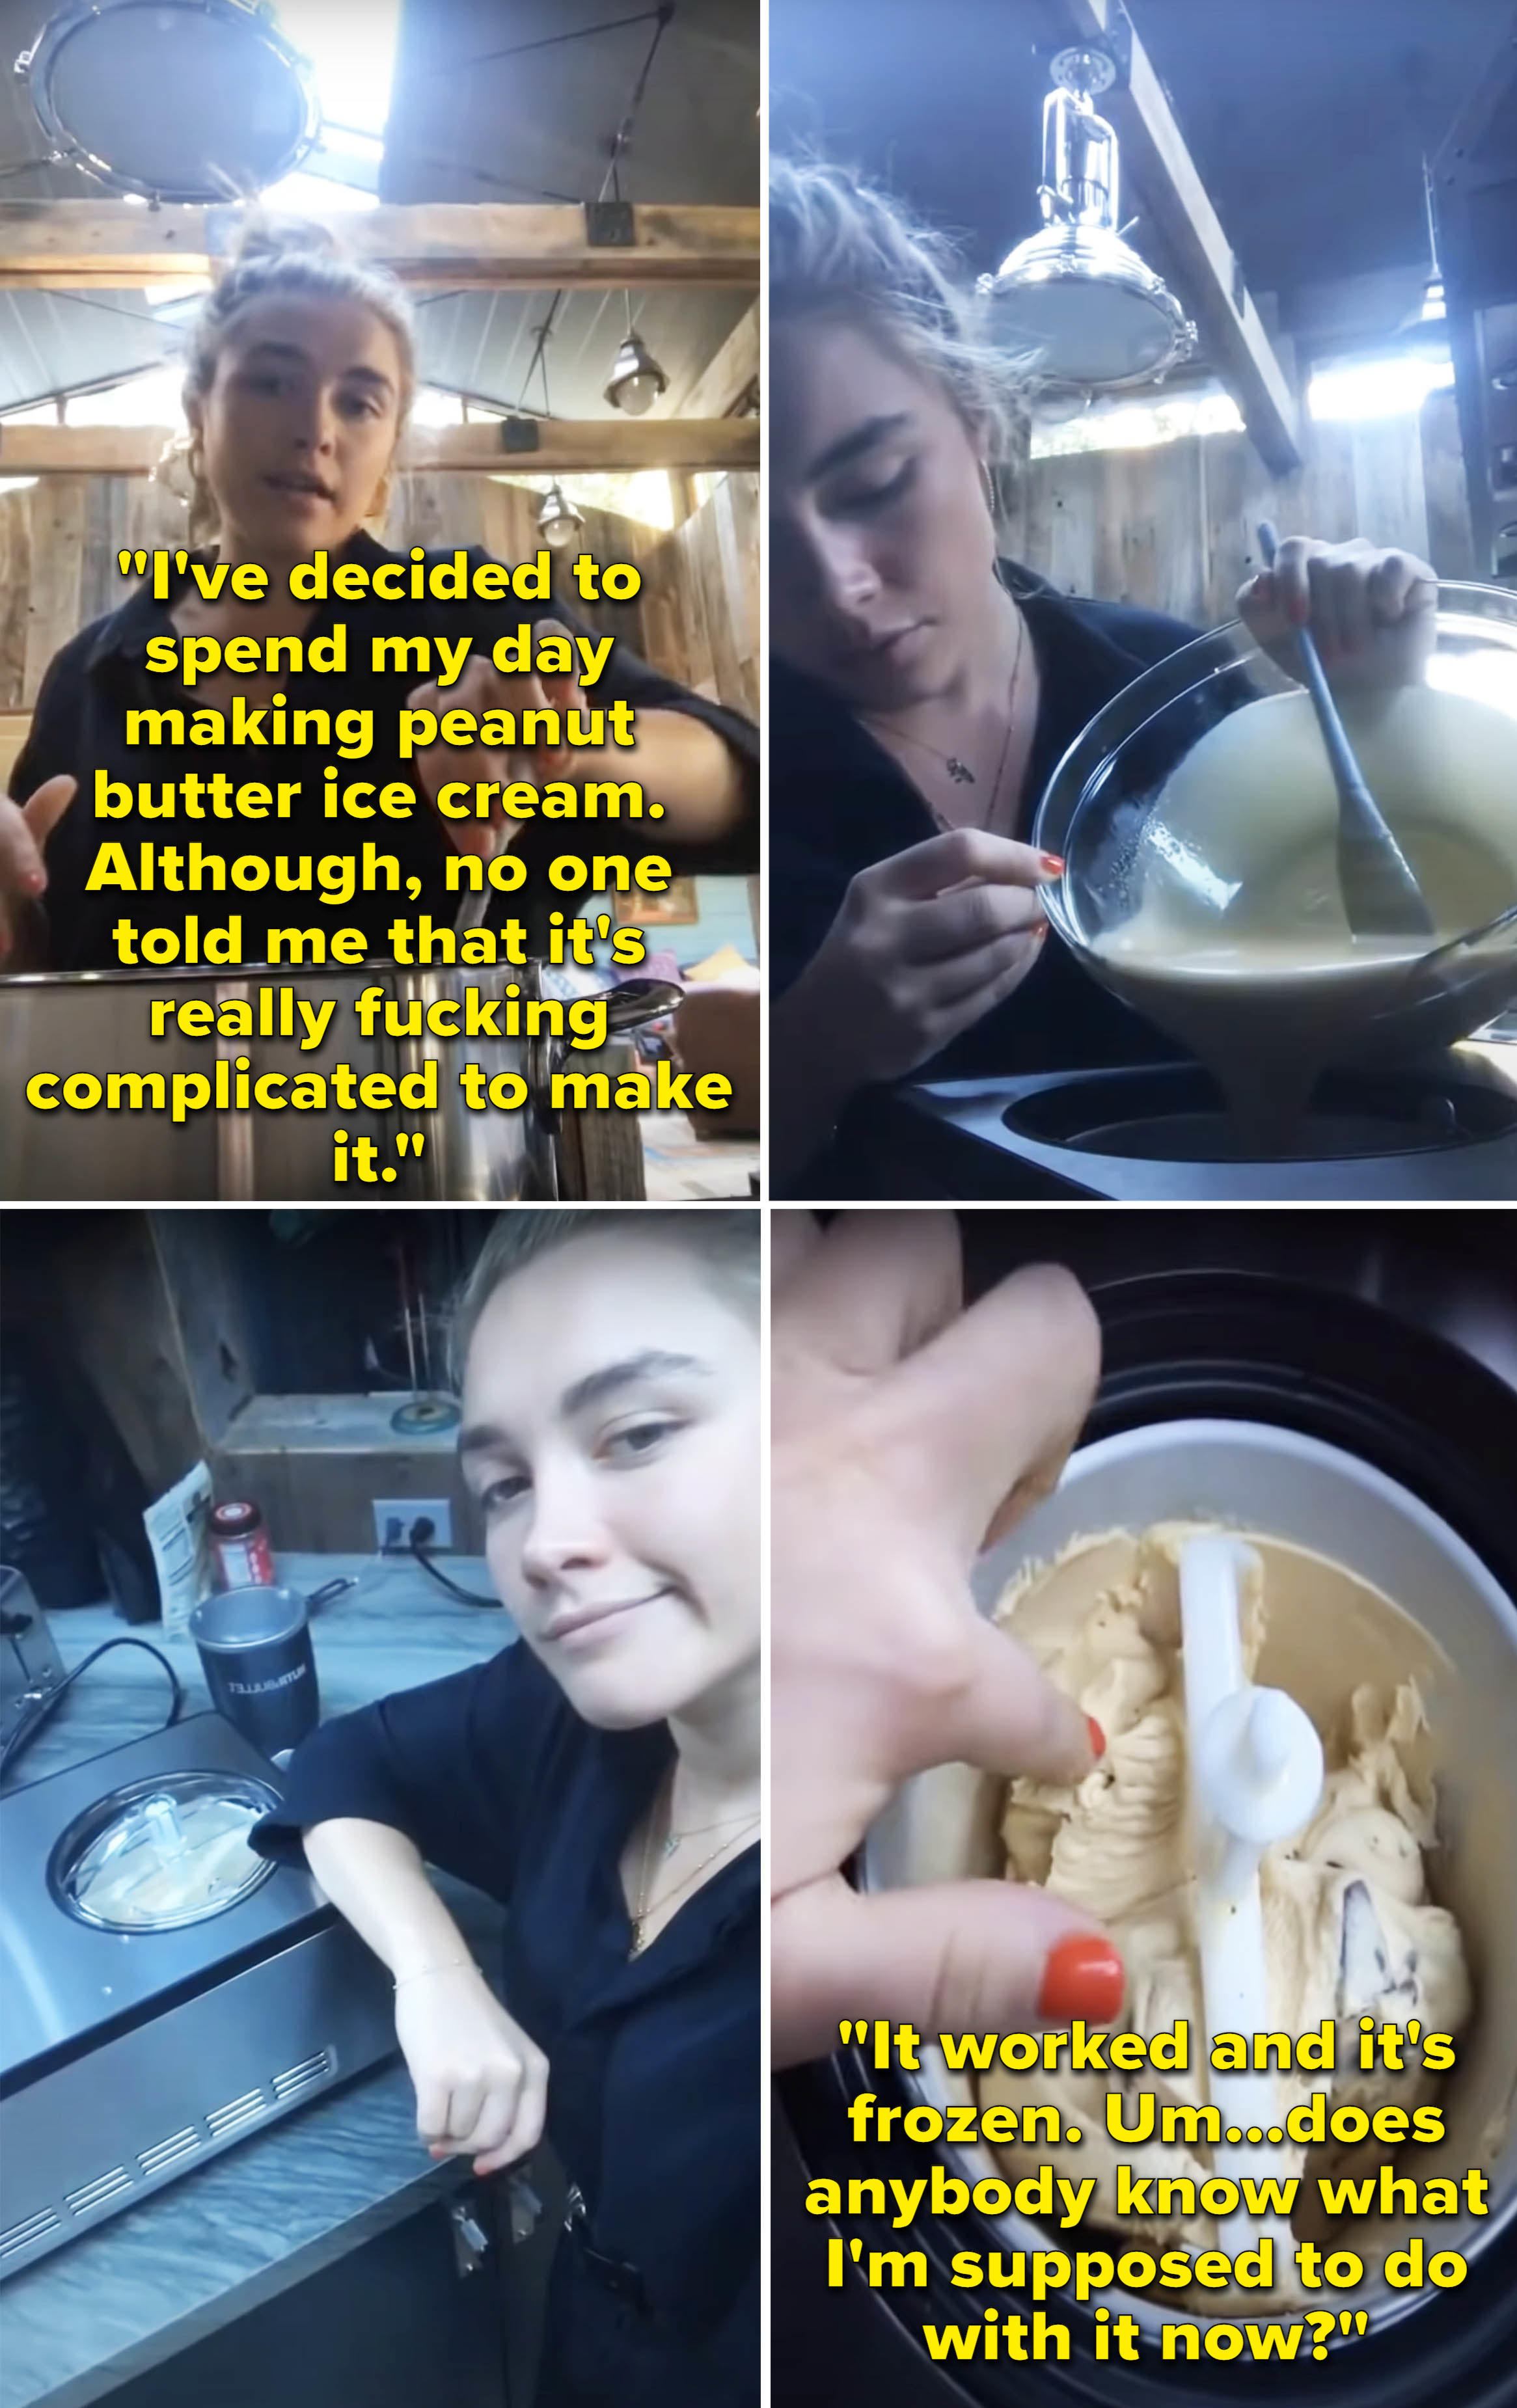 Florence explaining she&#x27;s making peanut butter ice cream, but &quot;it&#x27;s really fucking complicated to make&quot;